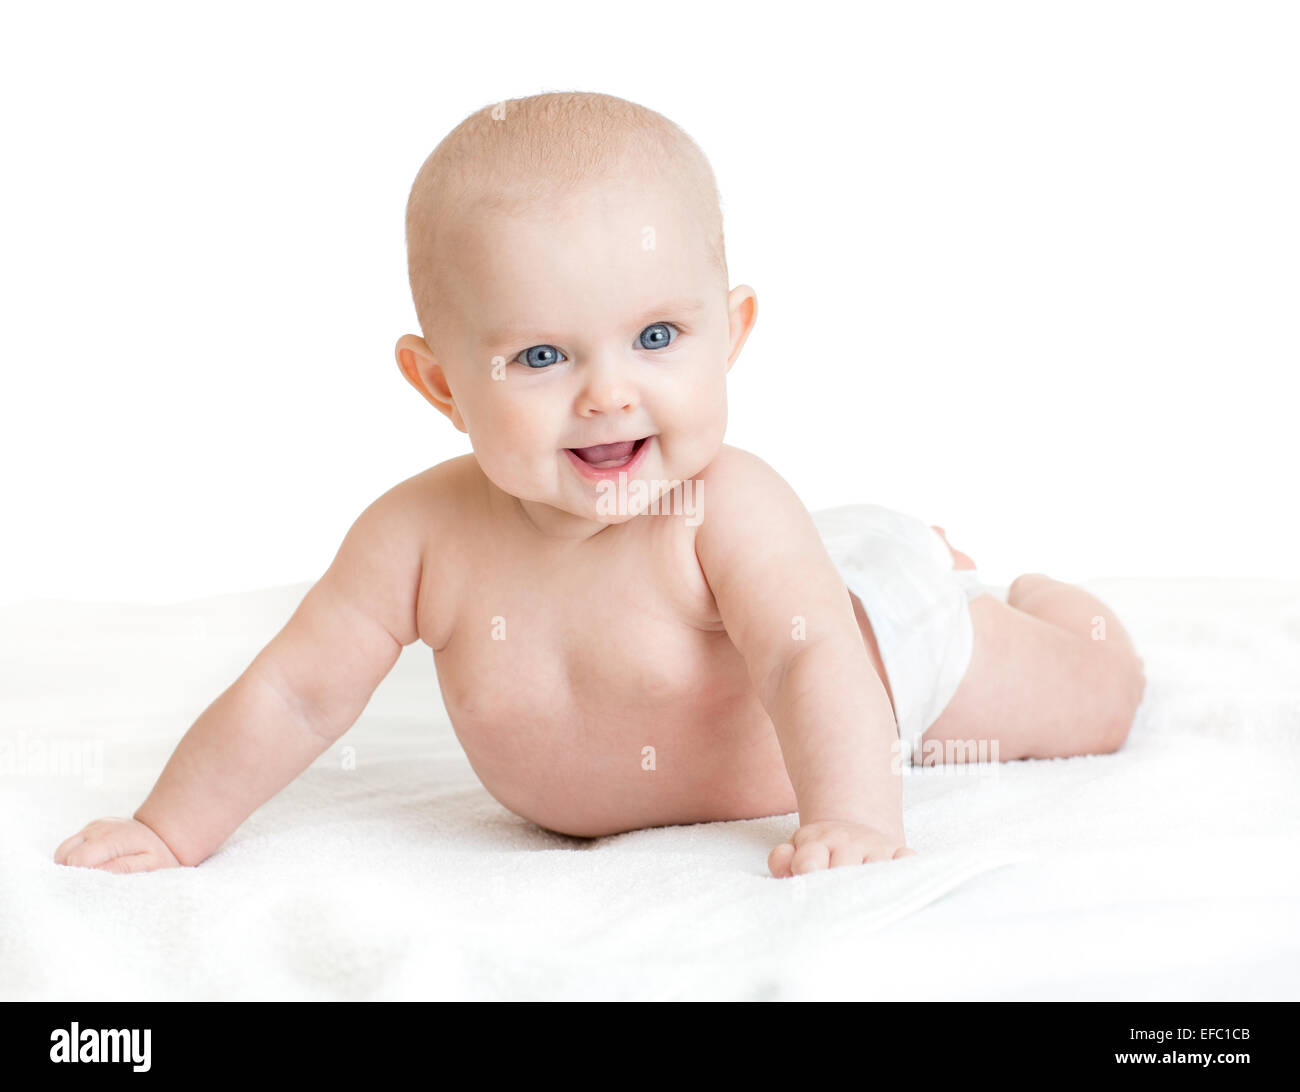 Cute smiling baby lying on white towel in nappy Stock Photo